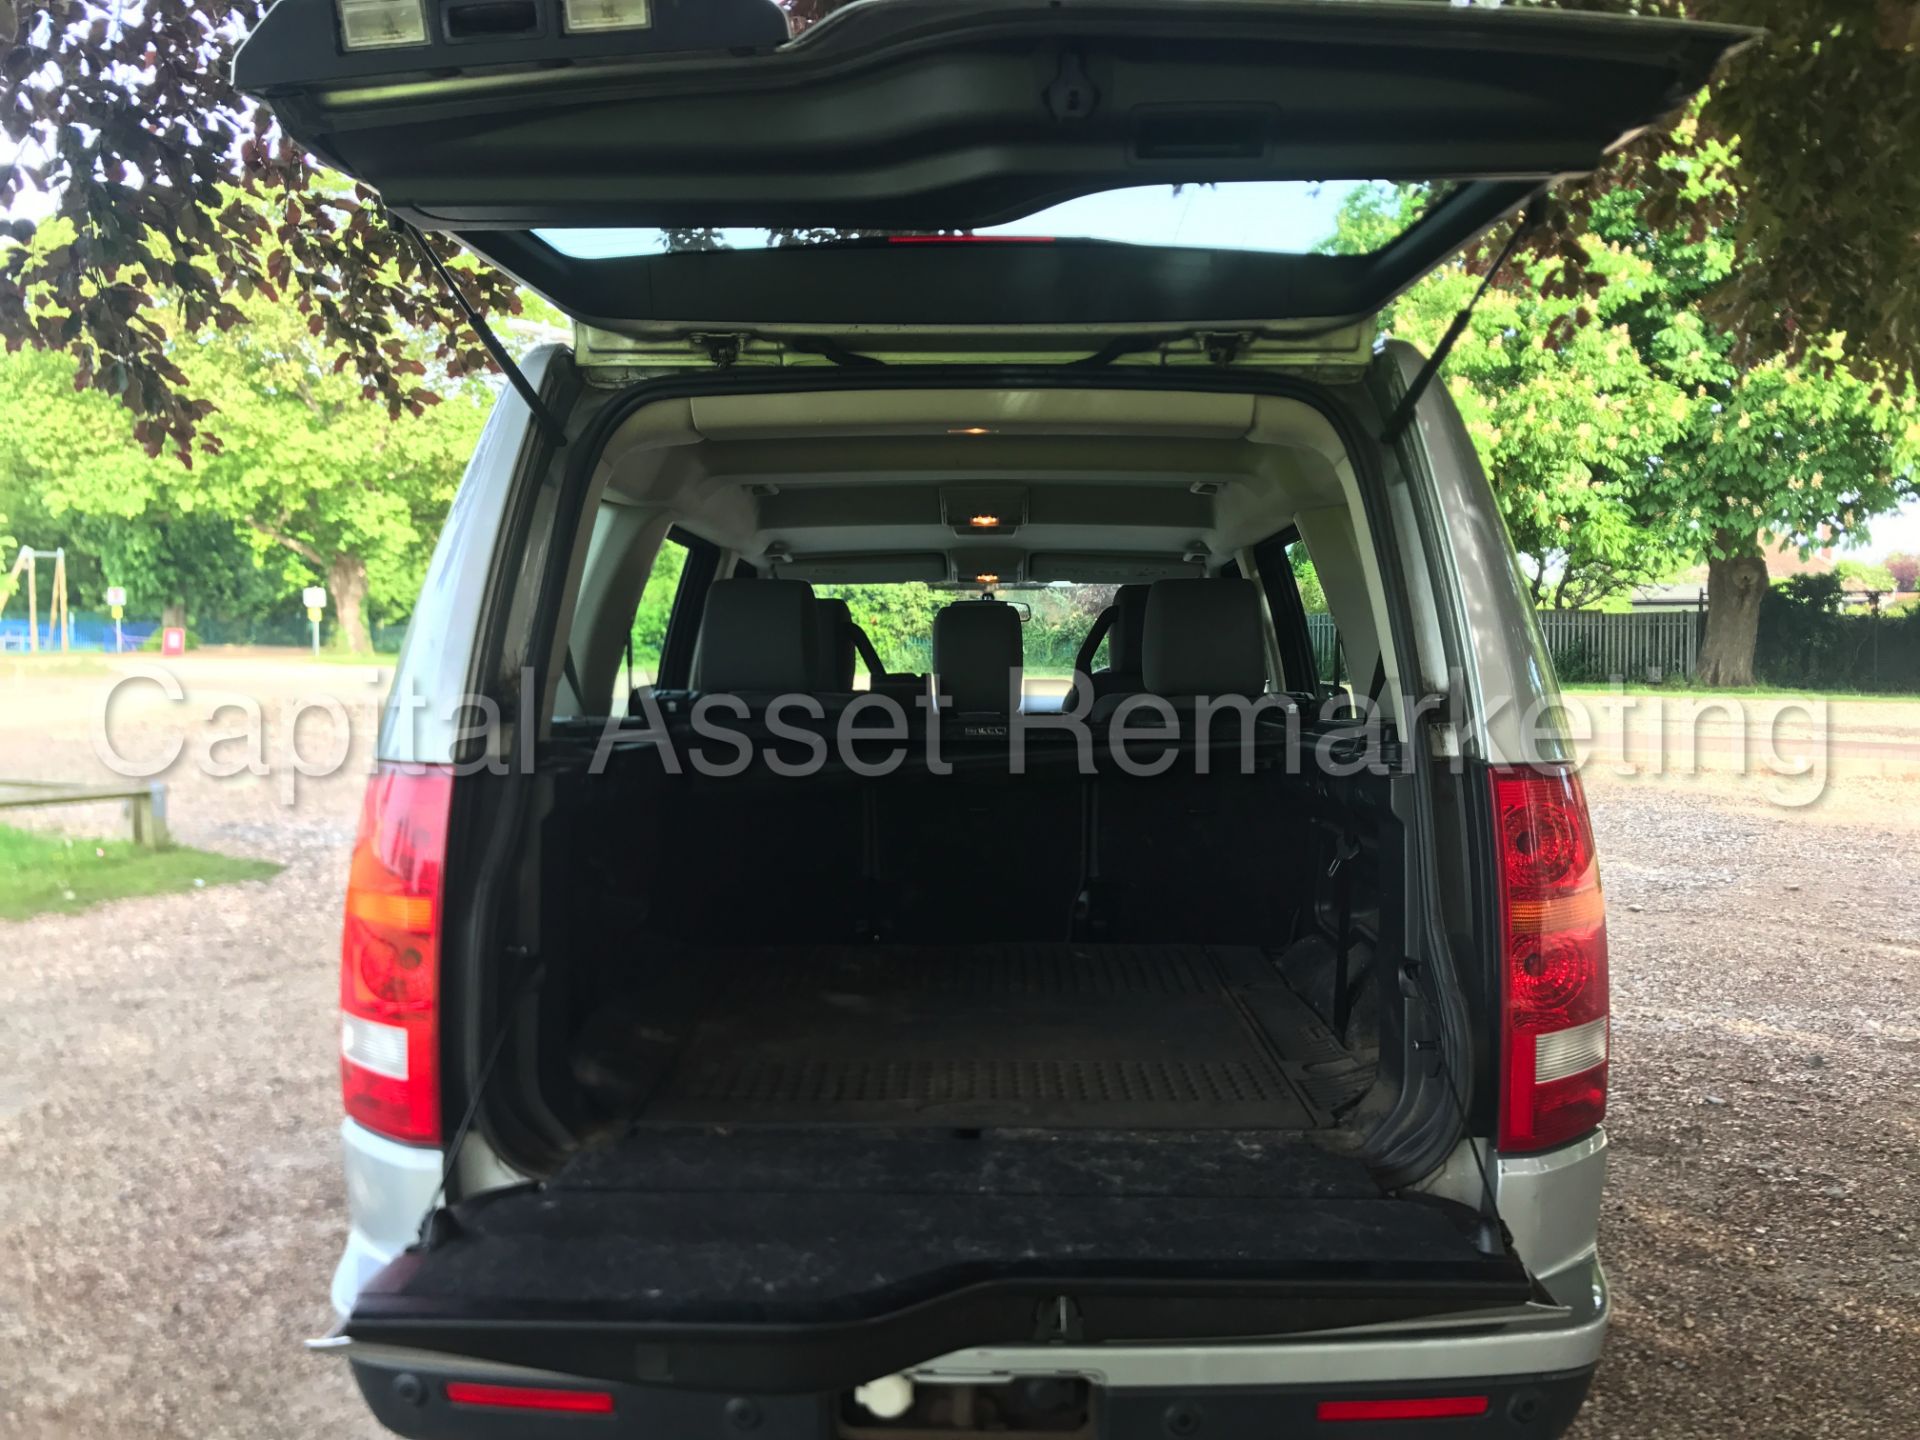 (On Sale) LAND ROVER DISCOVERY 3 (2009) 2.7 TDV6 - AUTO - 7 SEATER - AIR SUSPENSION (NO VAT) - Image 18 of 29